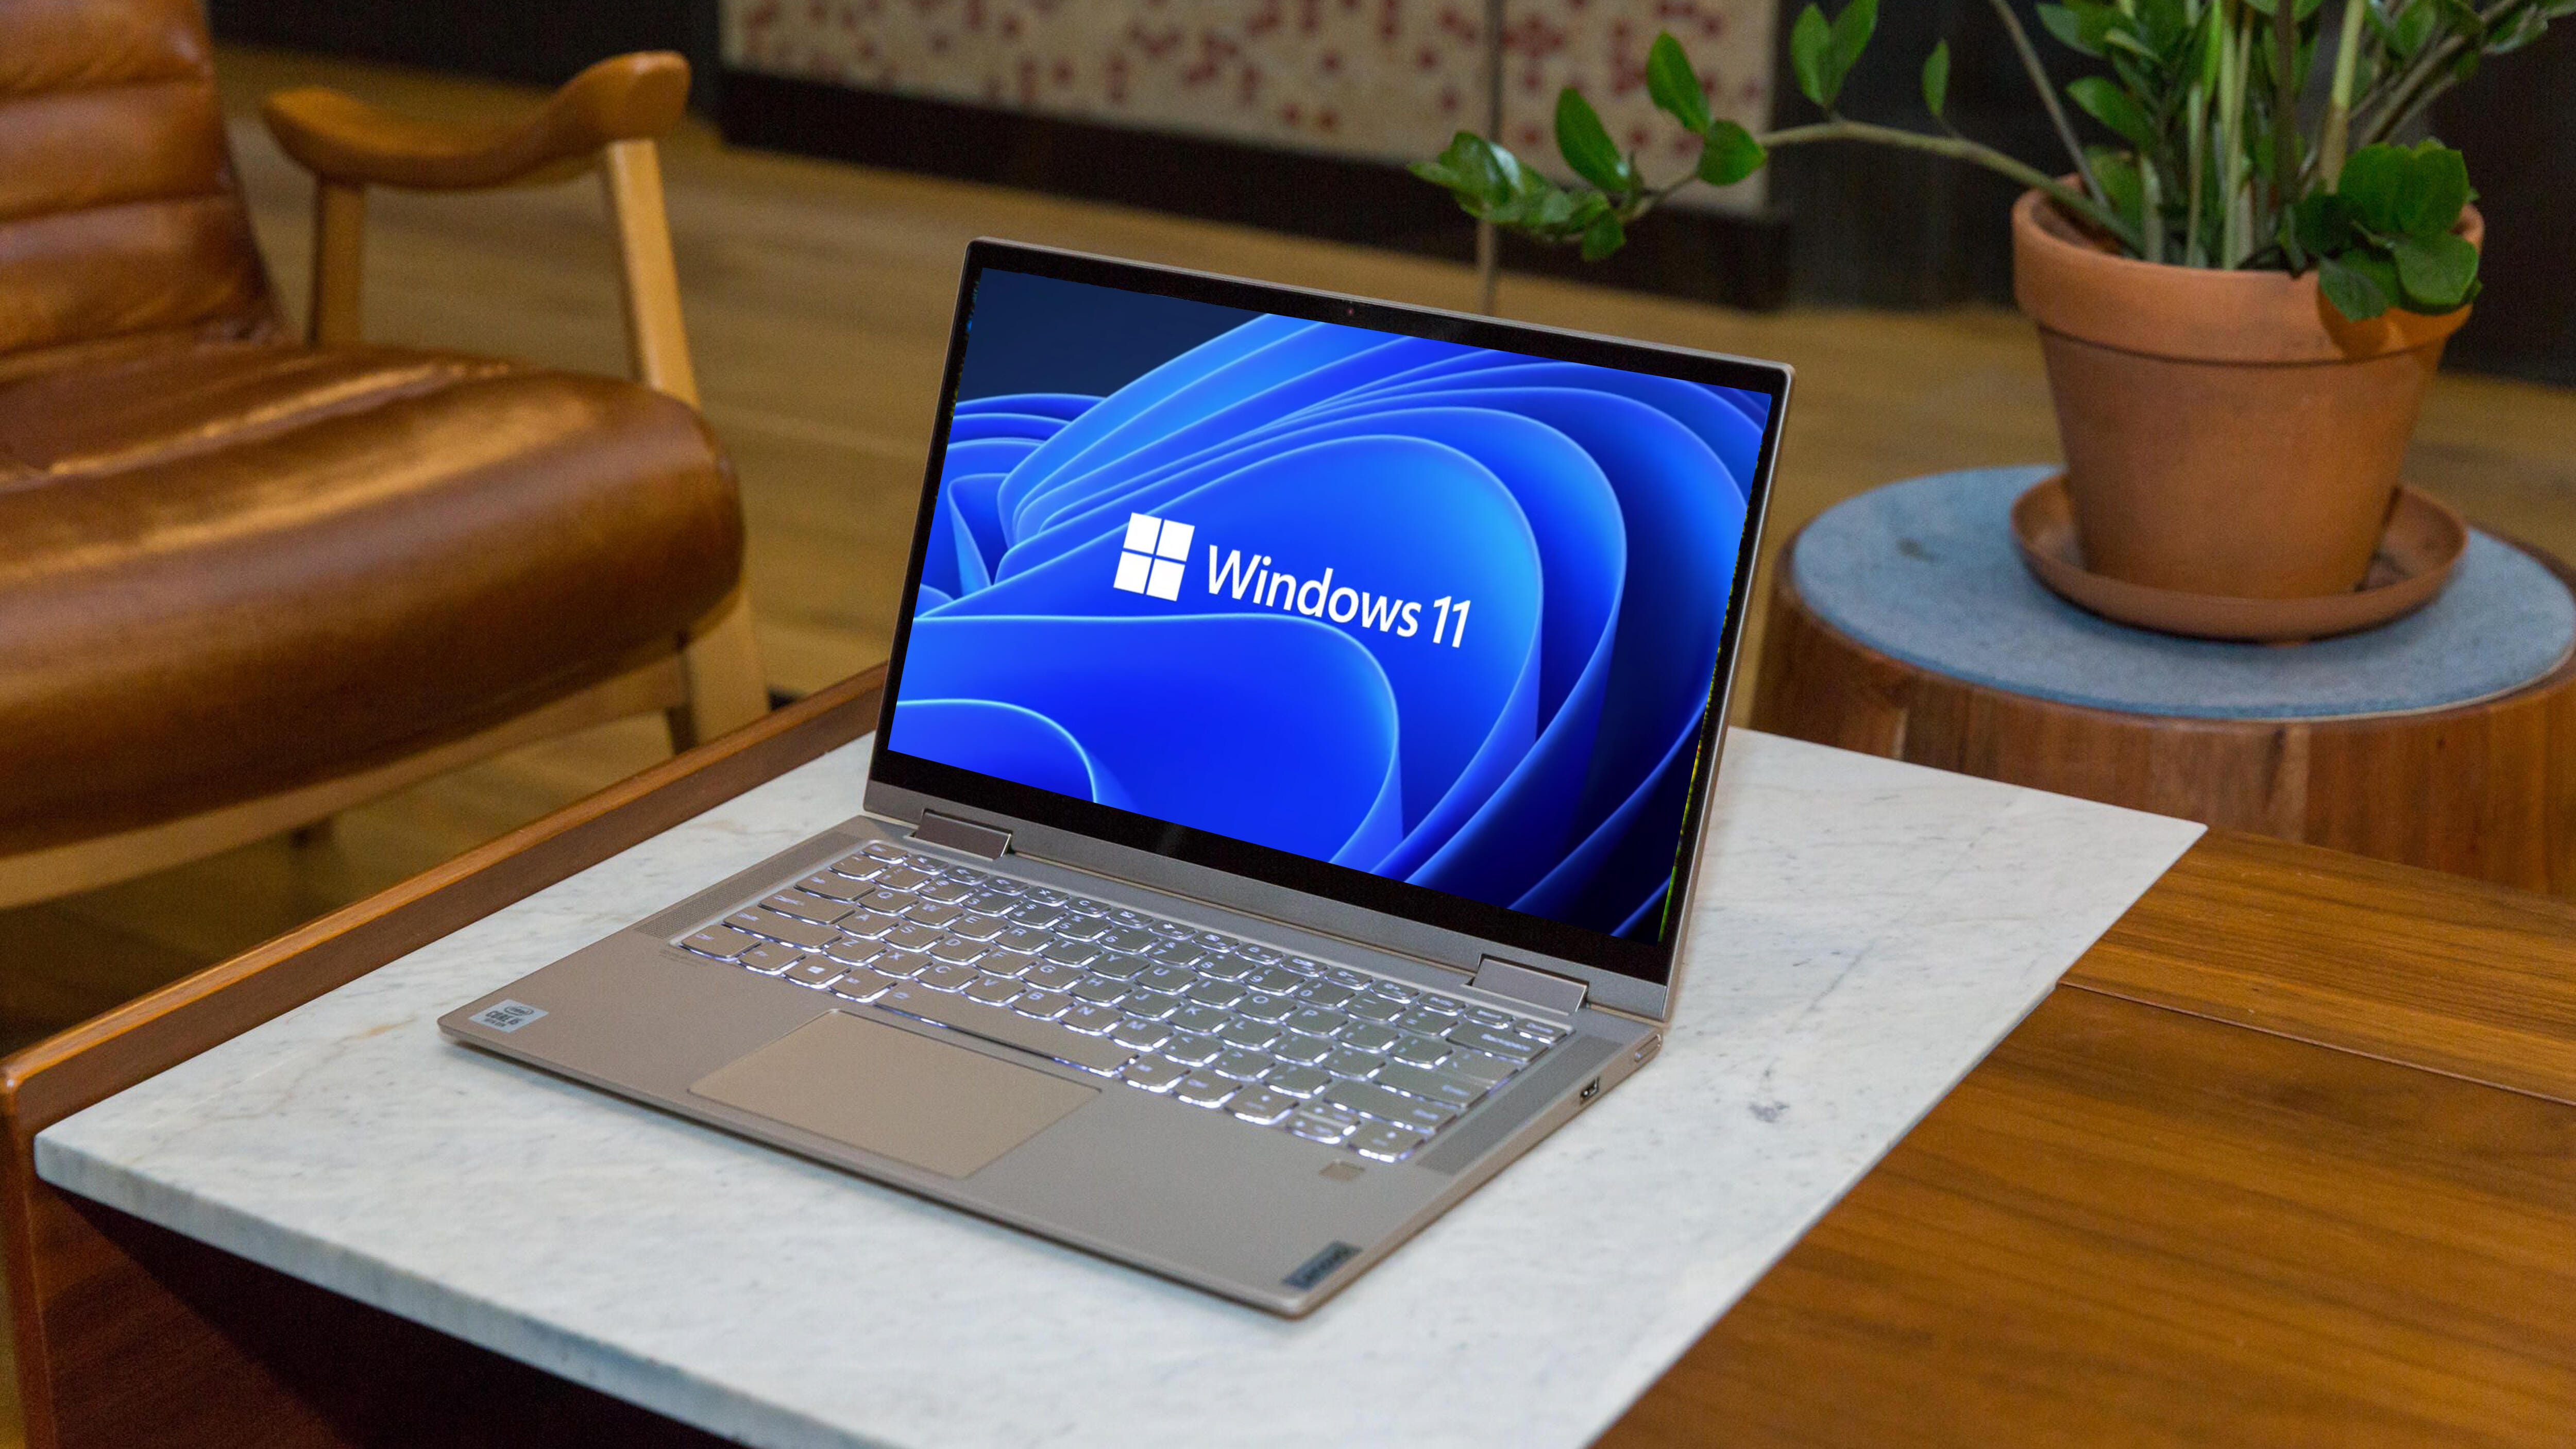 The Windows 11 start menu moved: How to put it back where it belongs